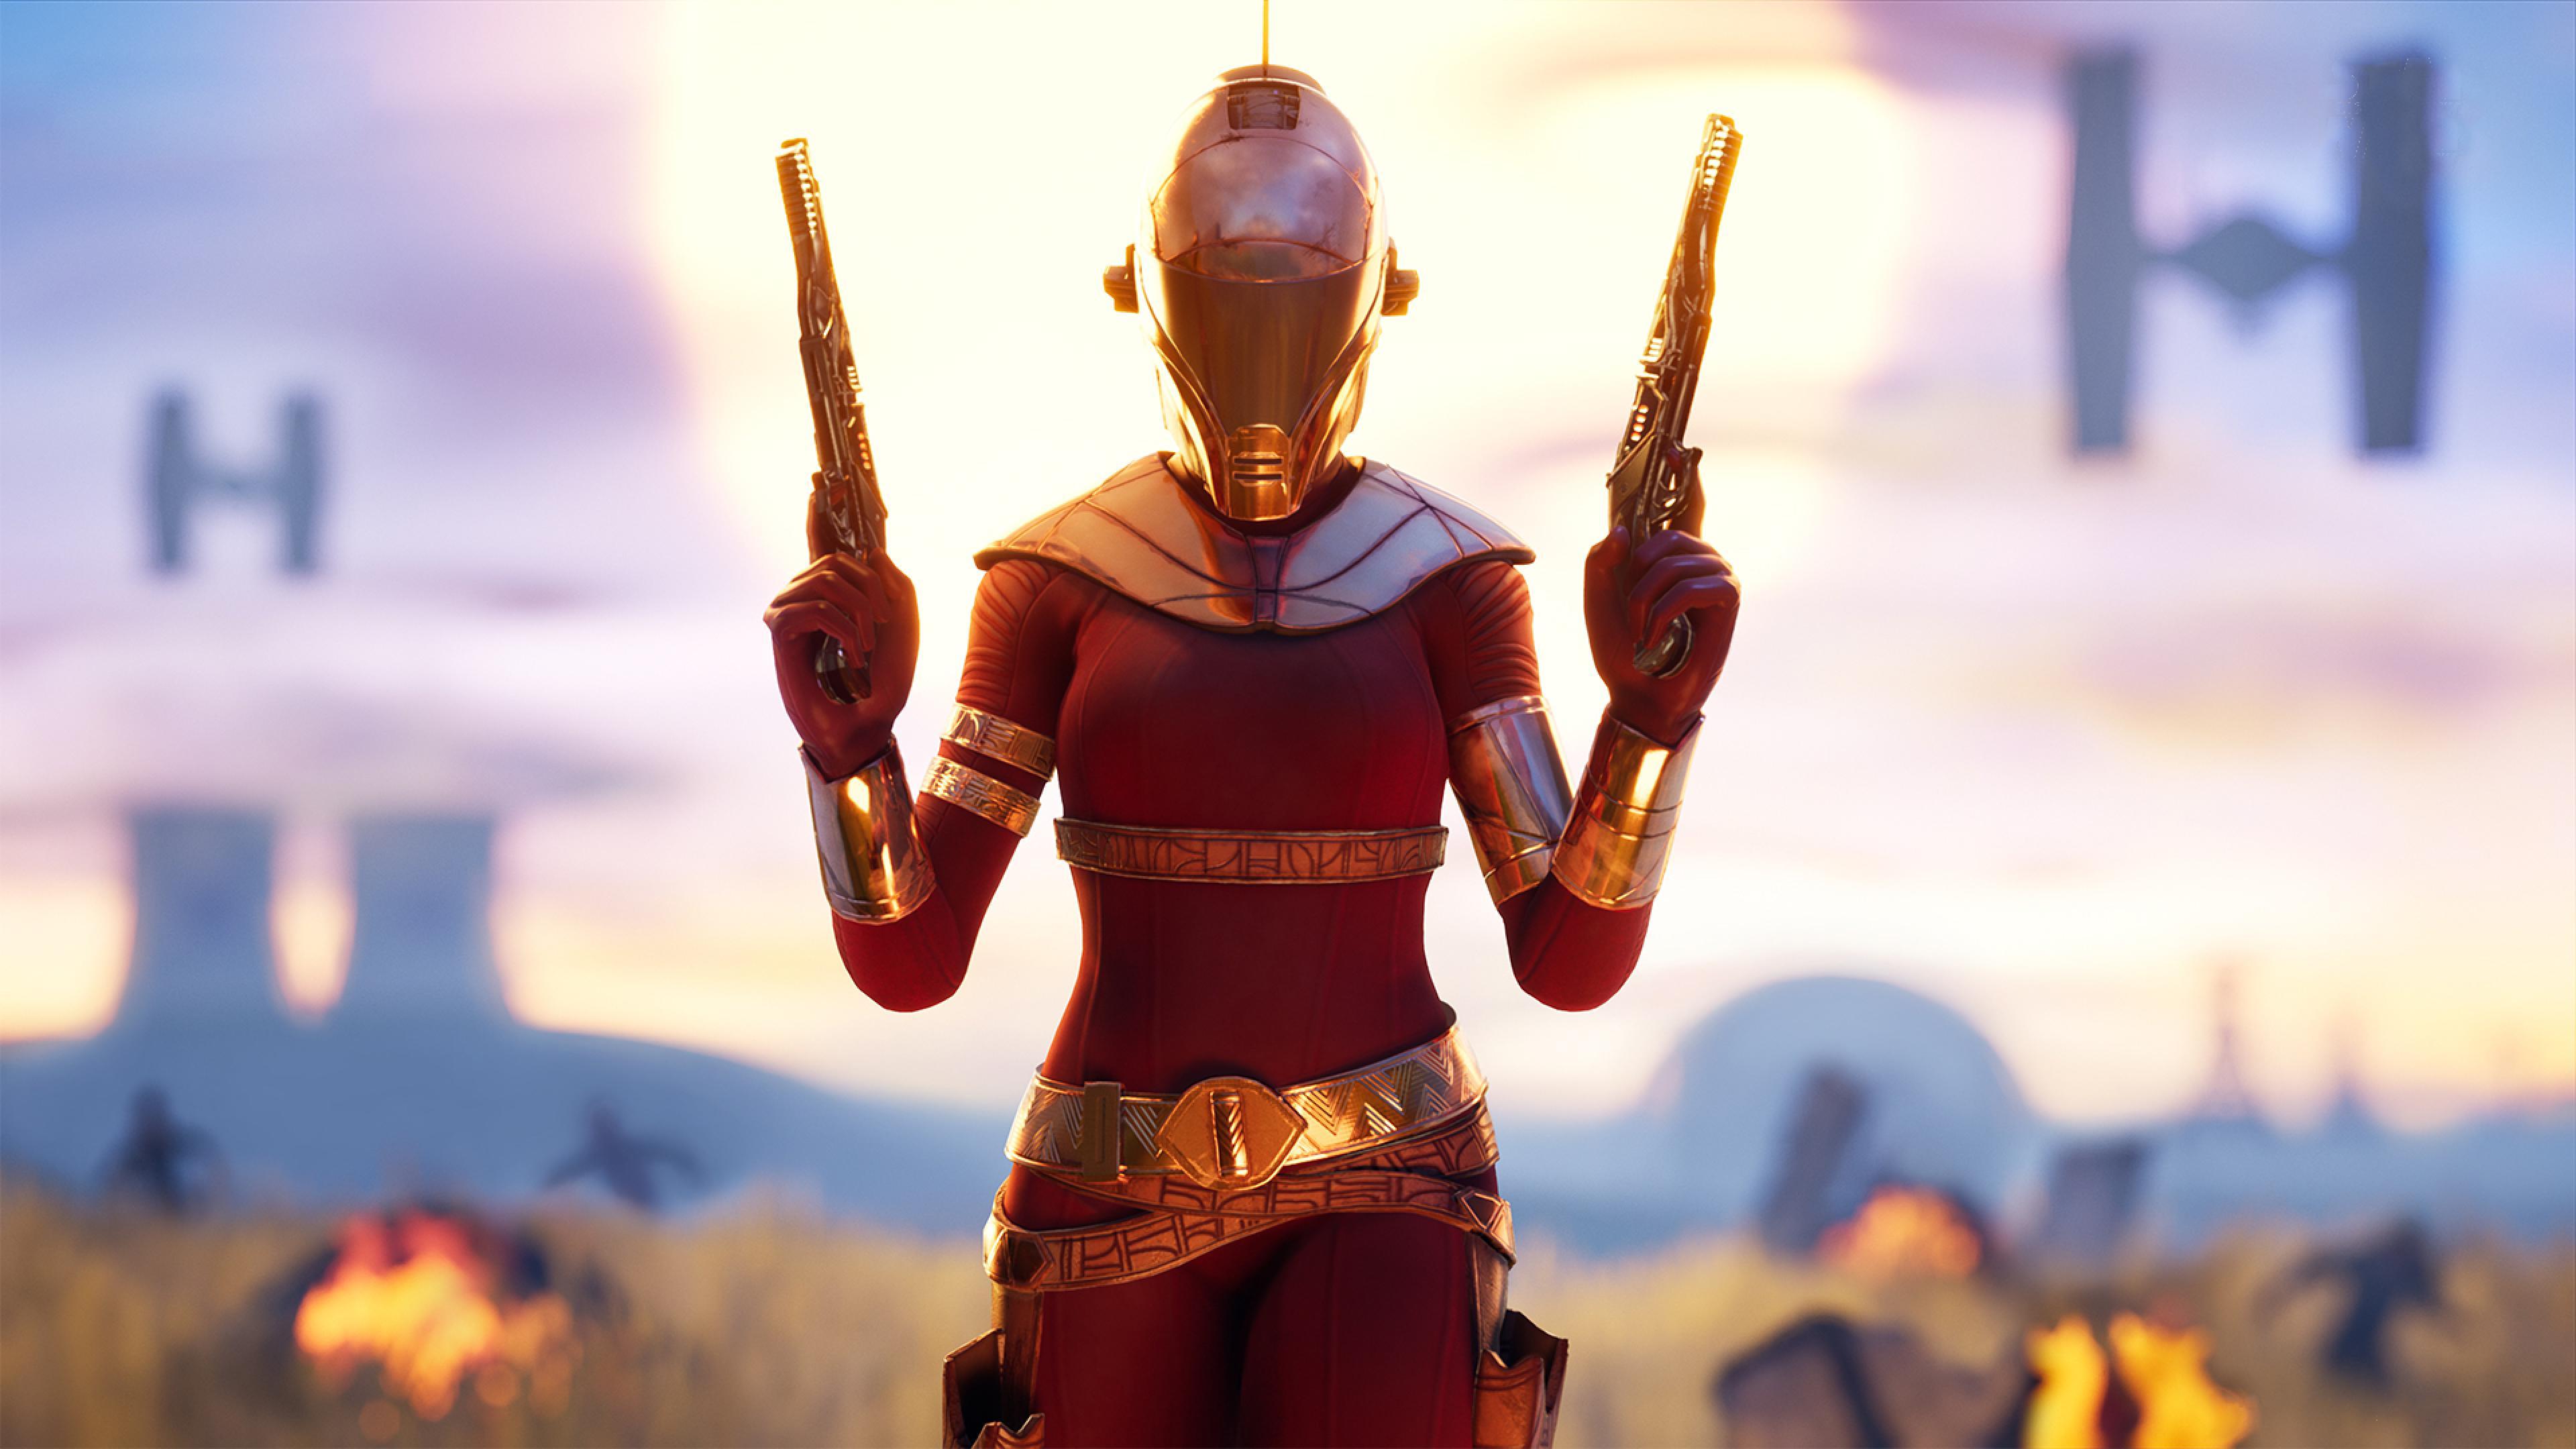 Zorii Bliss Fortnite Outfit 4K Wallpaper, HD Games